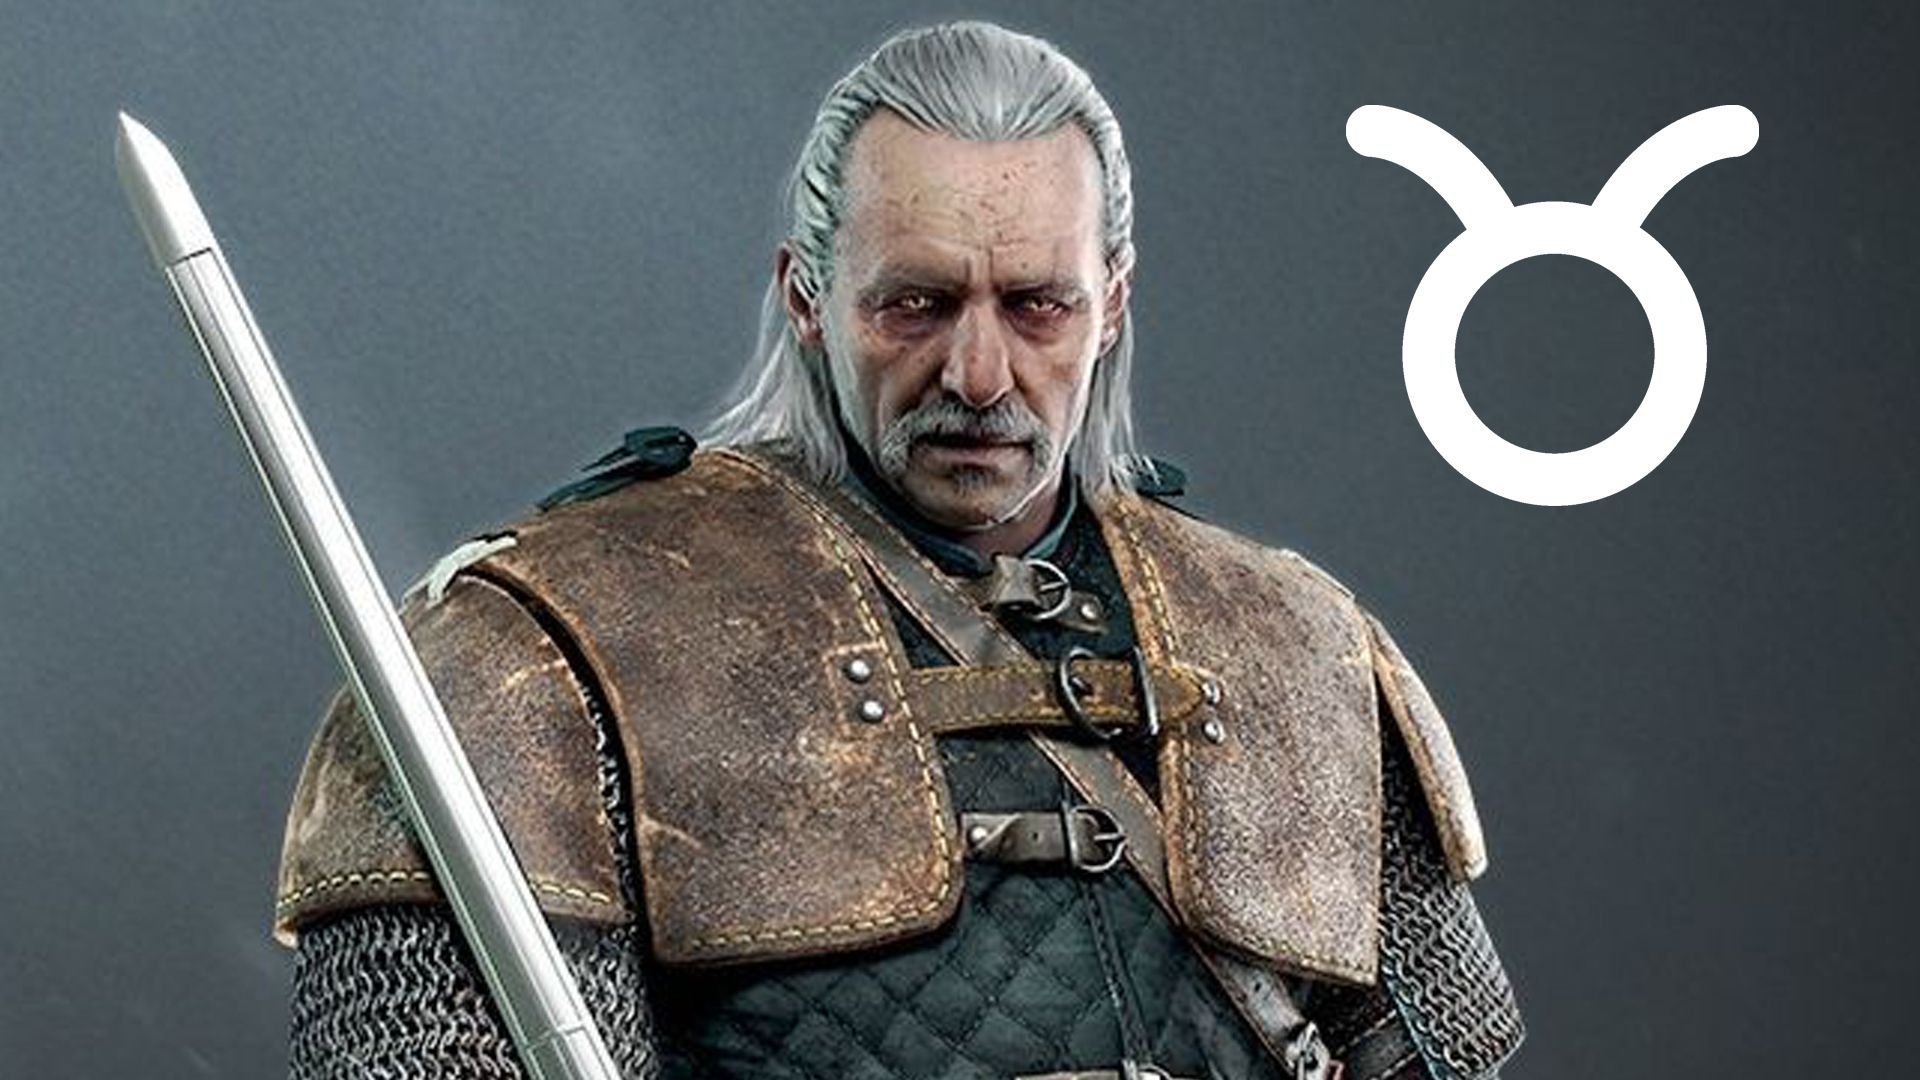 CD Projekt Red, CDProjekt Red, Henry Cavill, Netflix, Nintendo Switch, PC, Podcast, PS4, Switch, The Witcher, The Witcher 3, the witcher 3: wild hunt, The Witcher 3: Wild Hunt – Blood and Wine, The Witcher: Nightmare of the Wolf, Vesemir, witcher, Xbox One